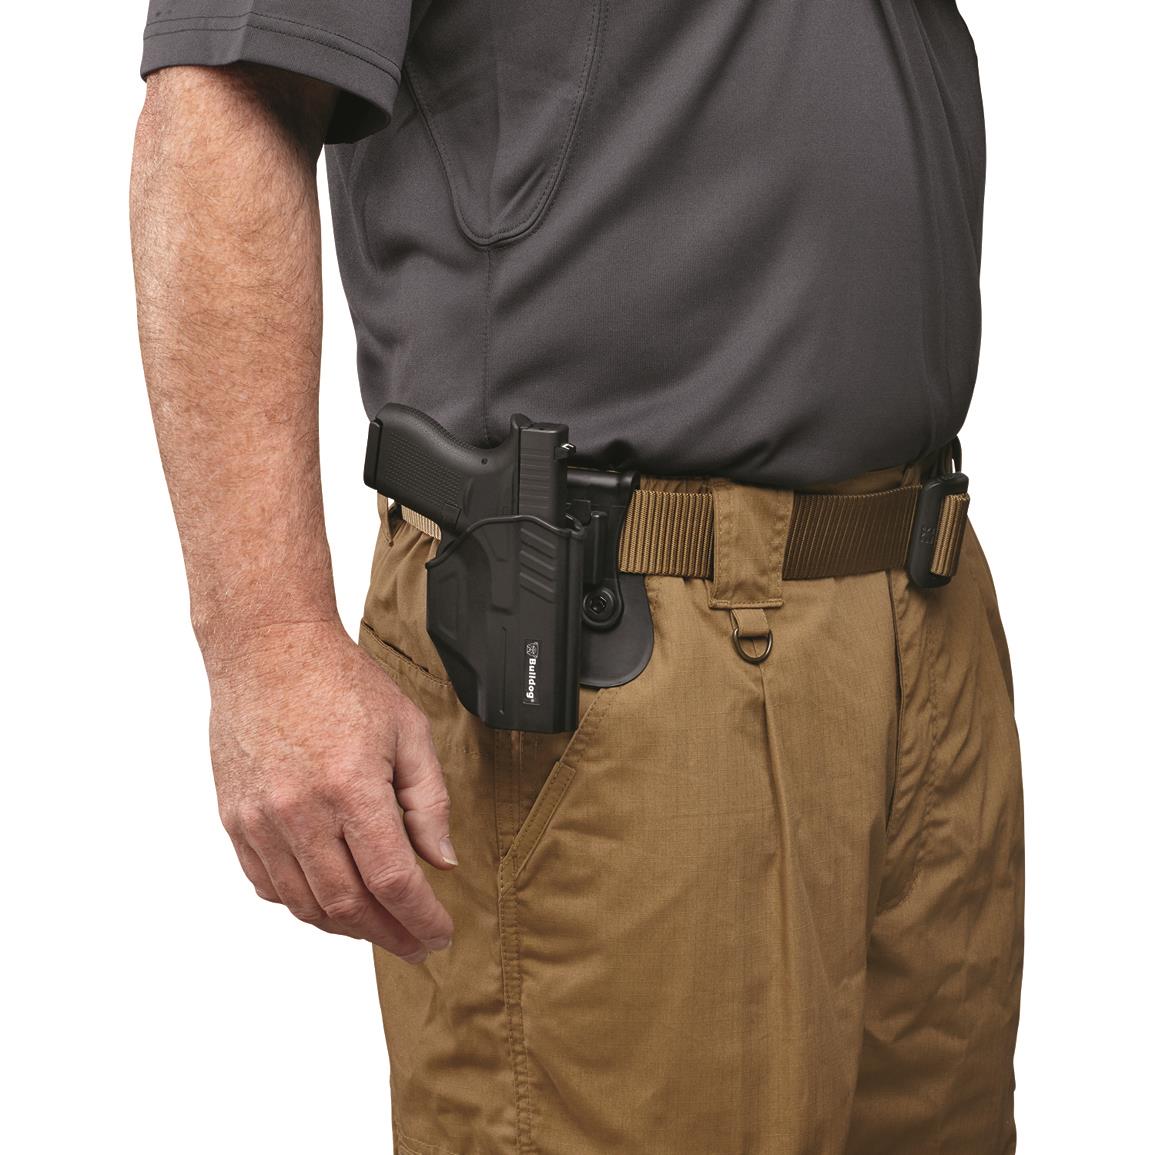 Bulldog Rapid Release Kydex Paddle Gun Holster Fits S & W M&p Shield 40 for sale online 